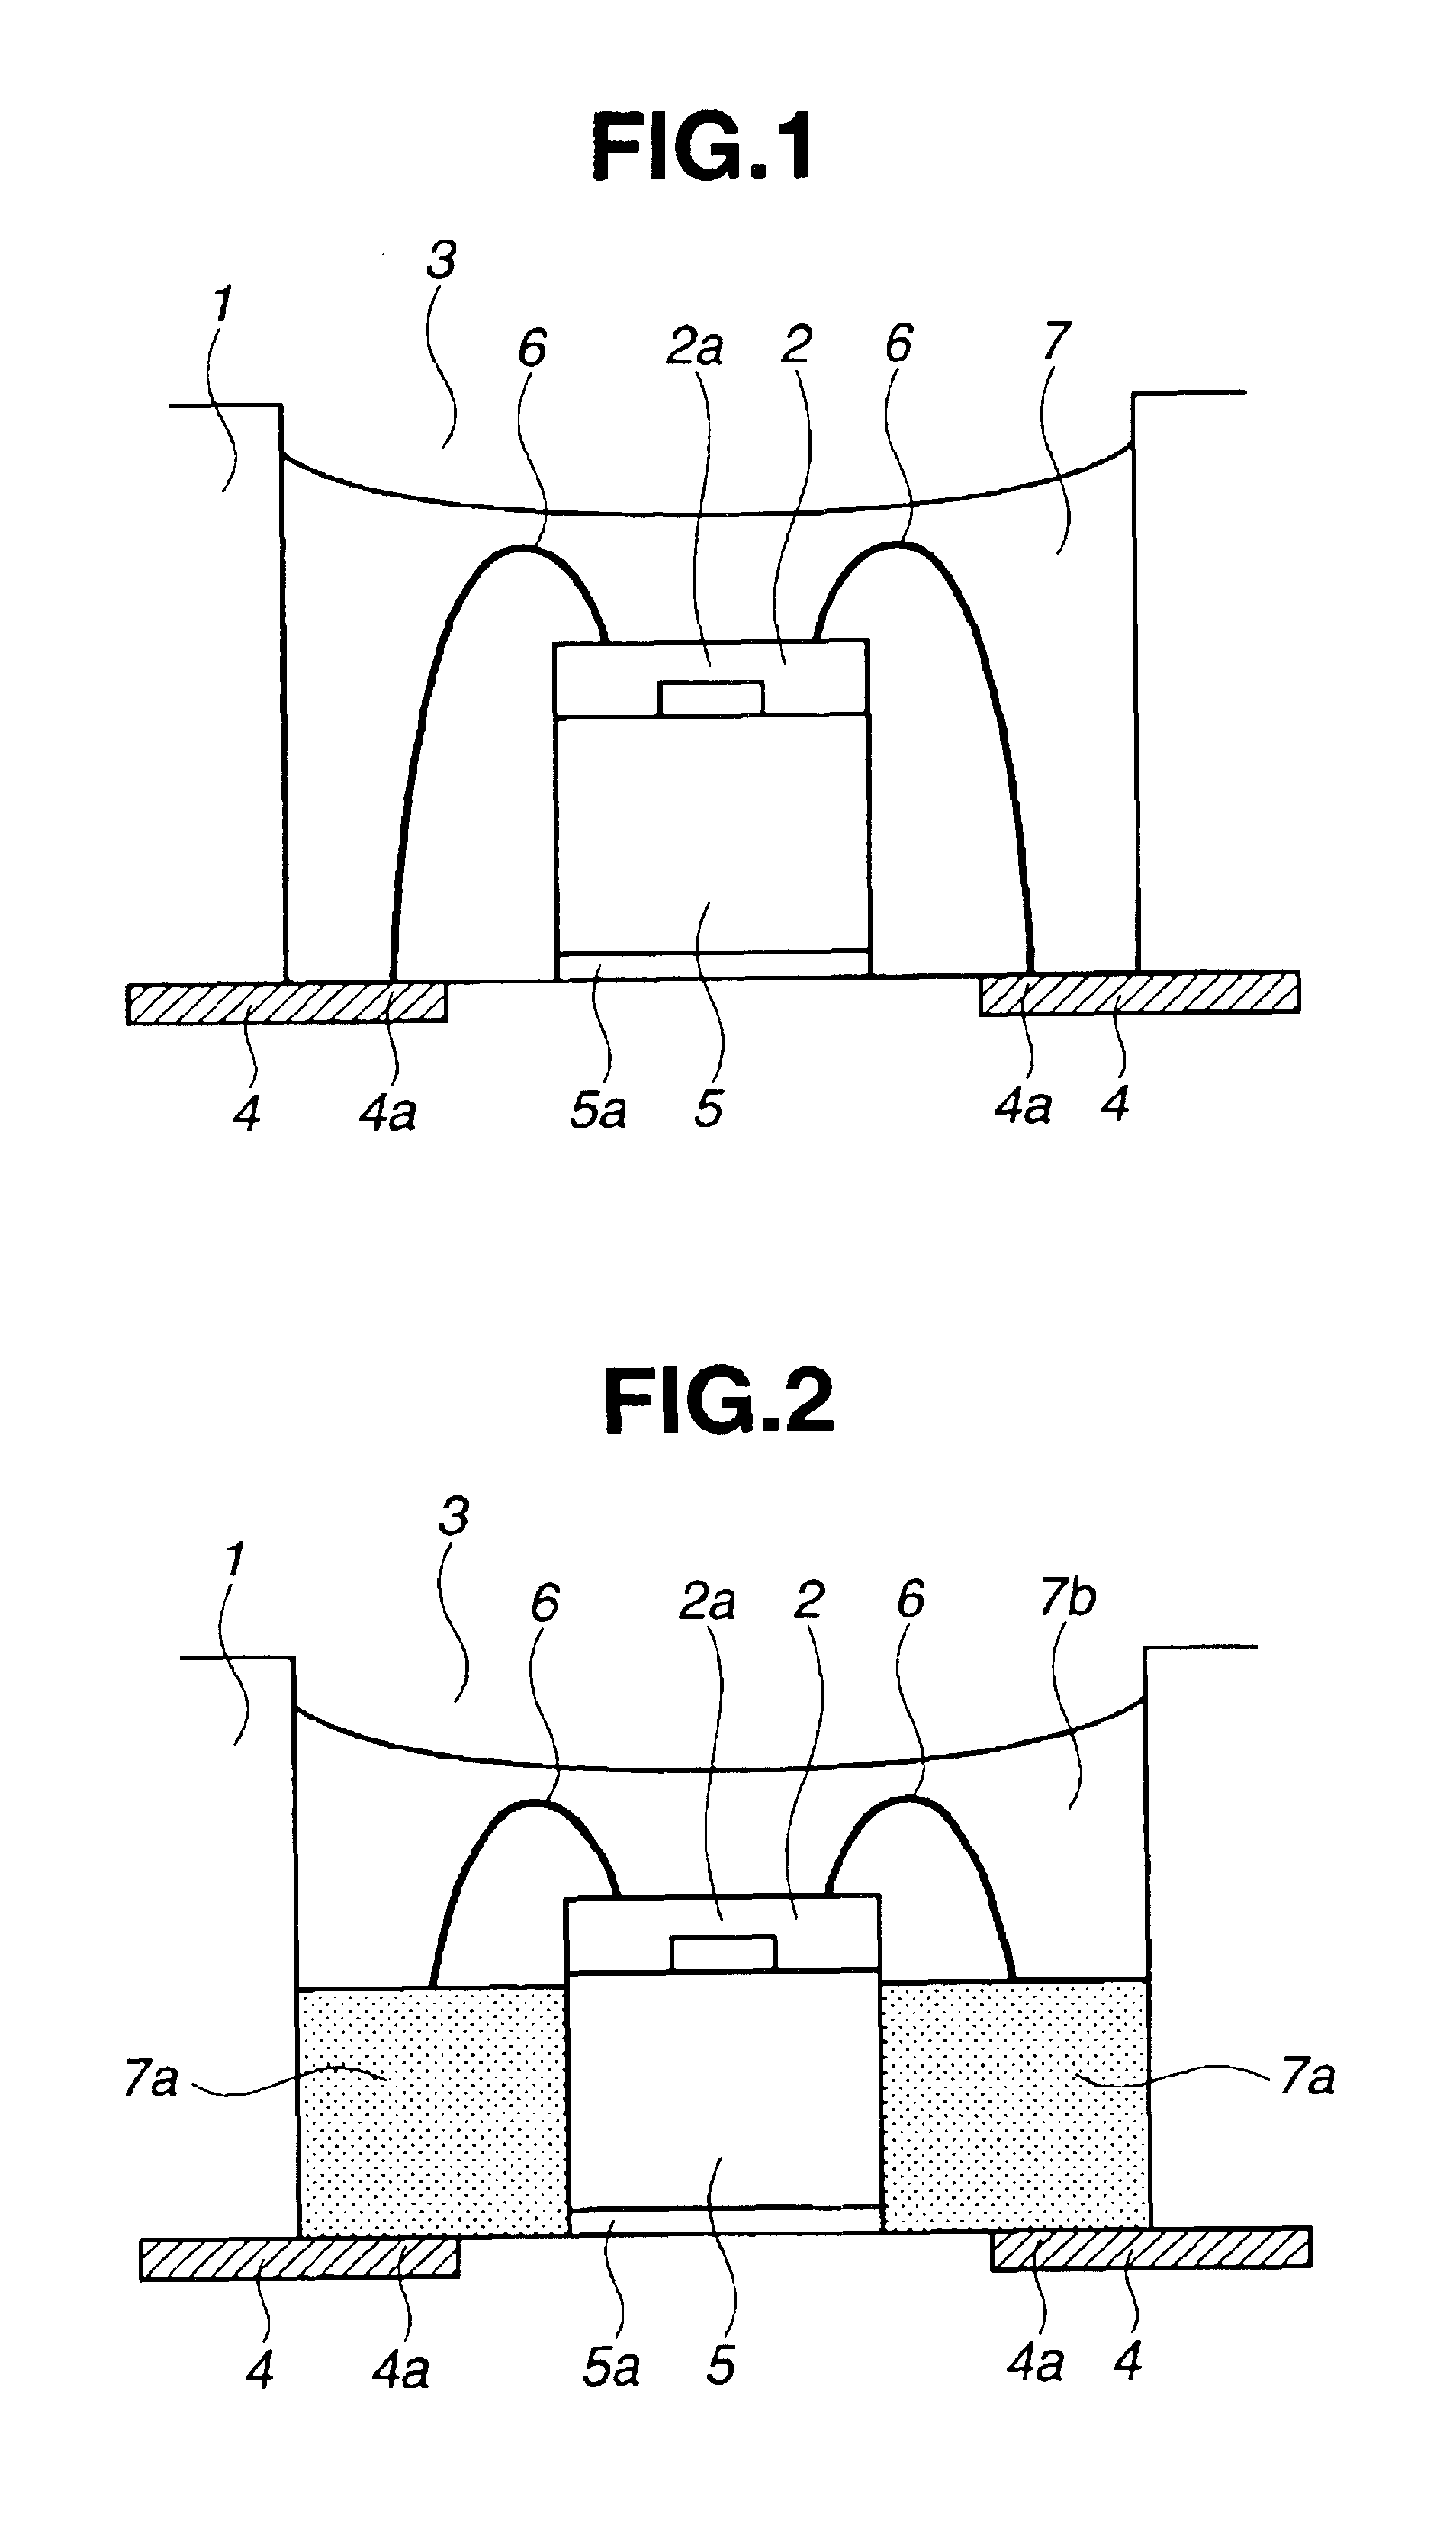 Semiconductor pressure sensor device protected with perfluoropolyether gel